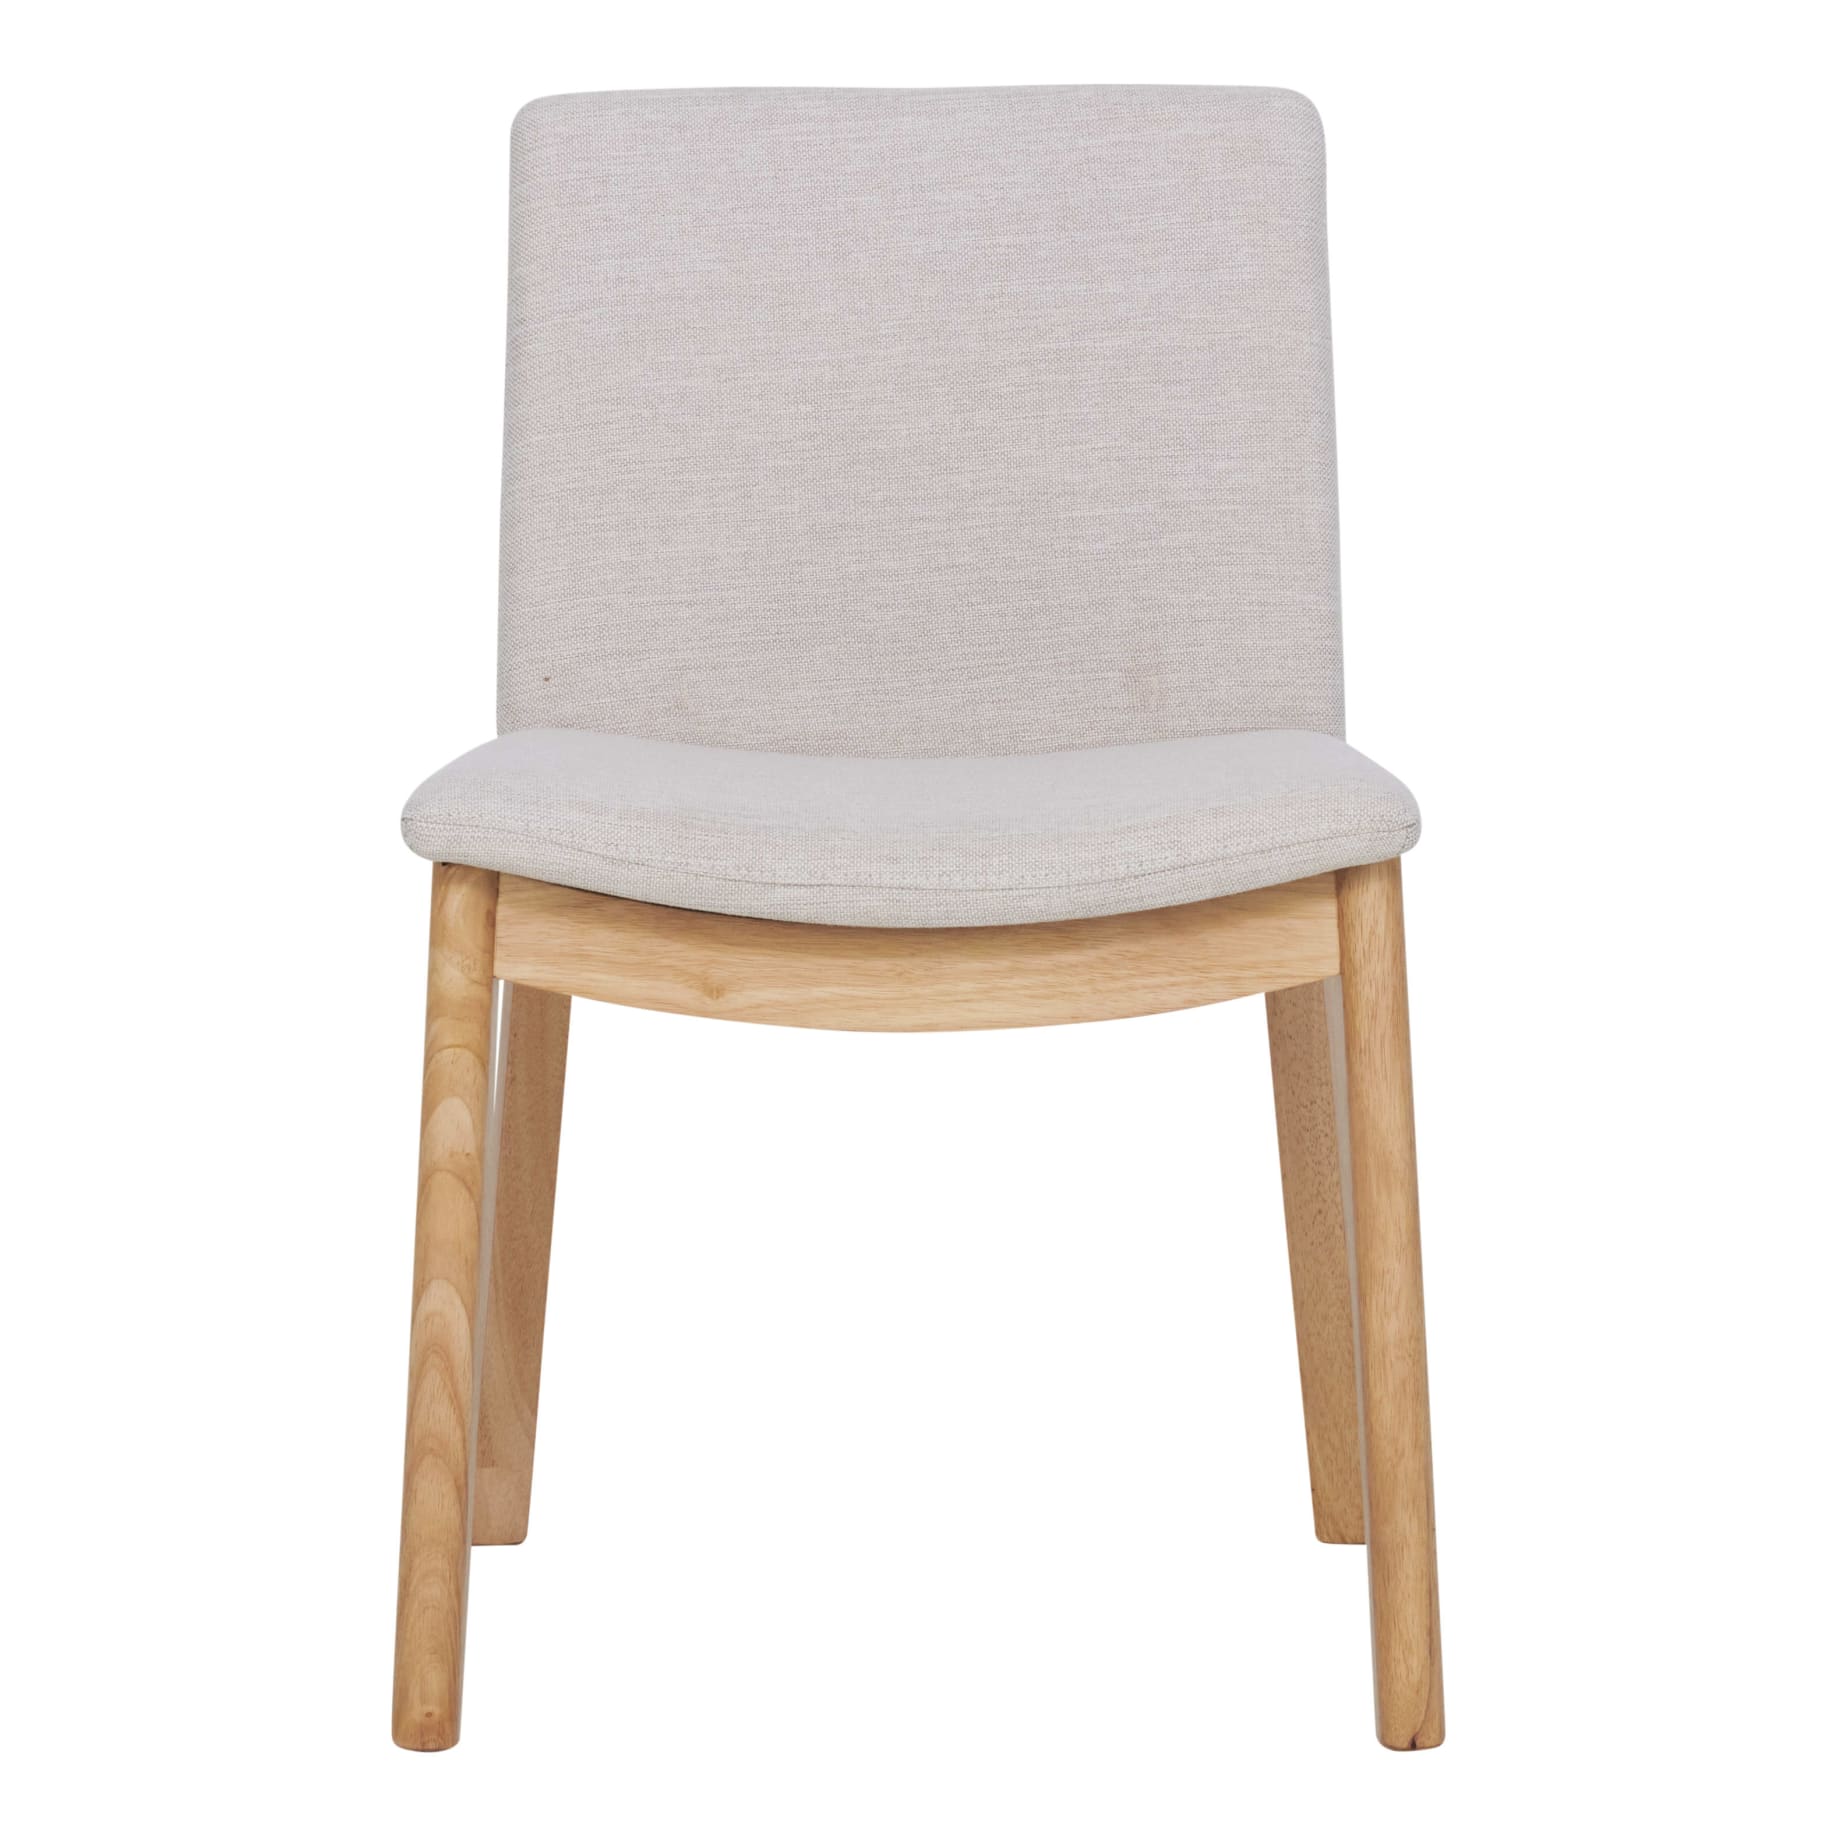 Everest Dining Chair in City Beige Fabric / Clear Lacquer